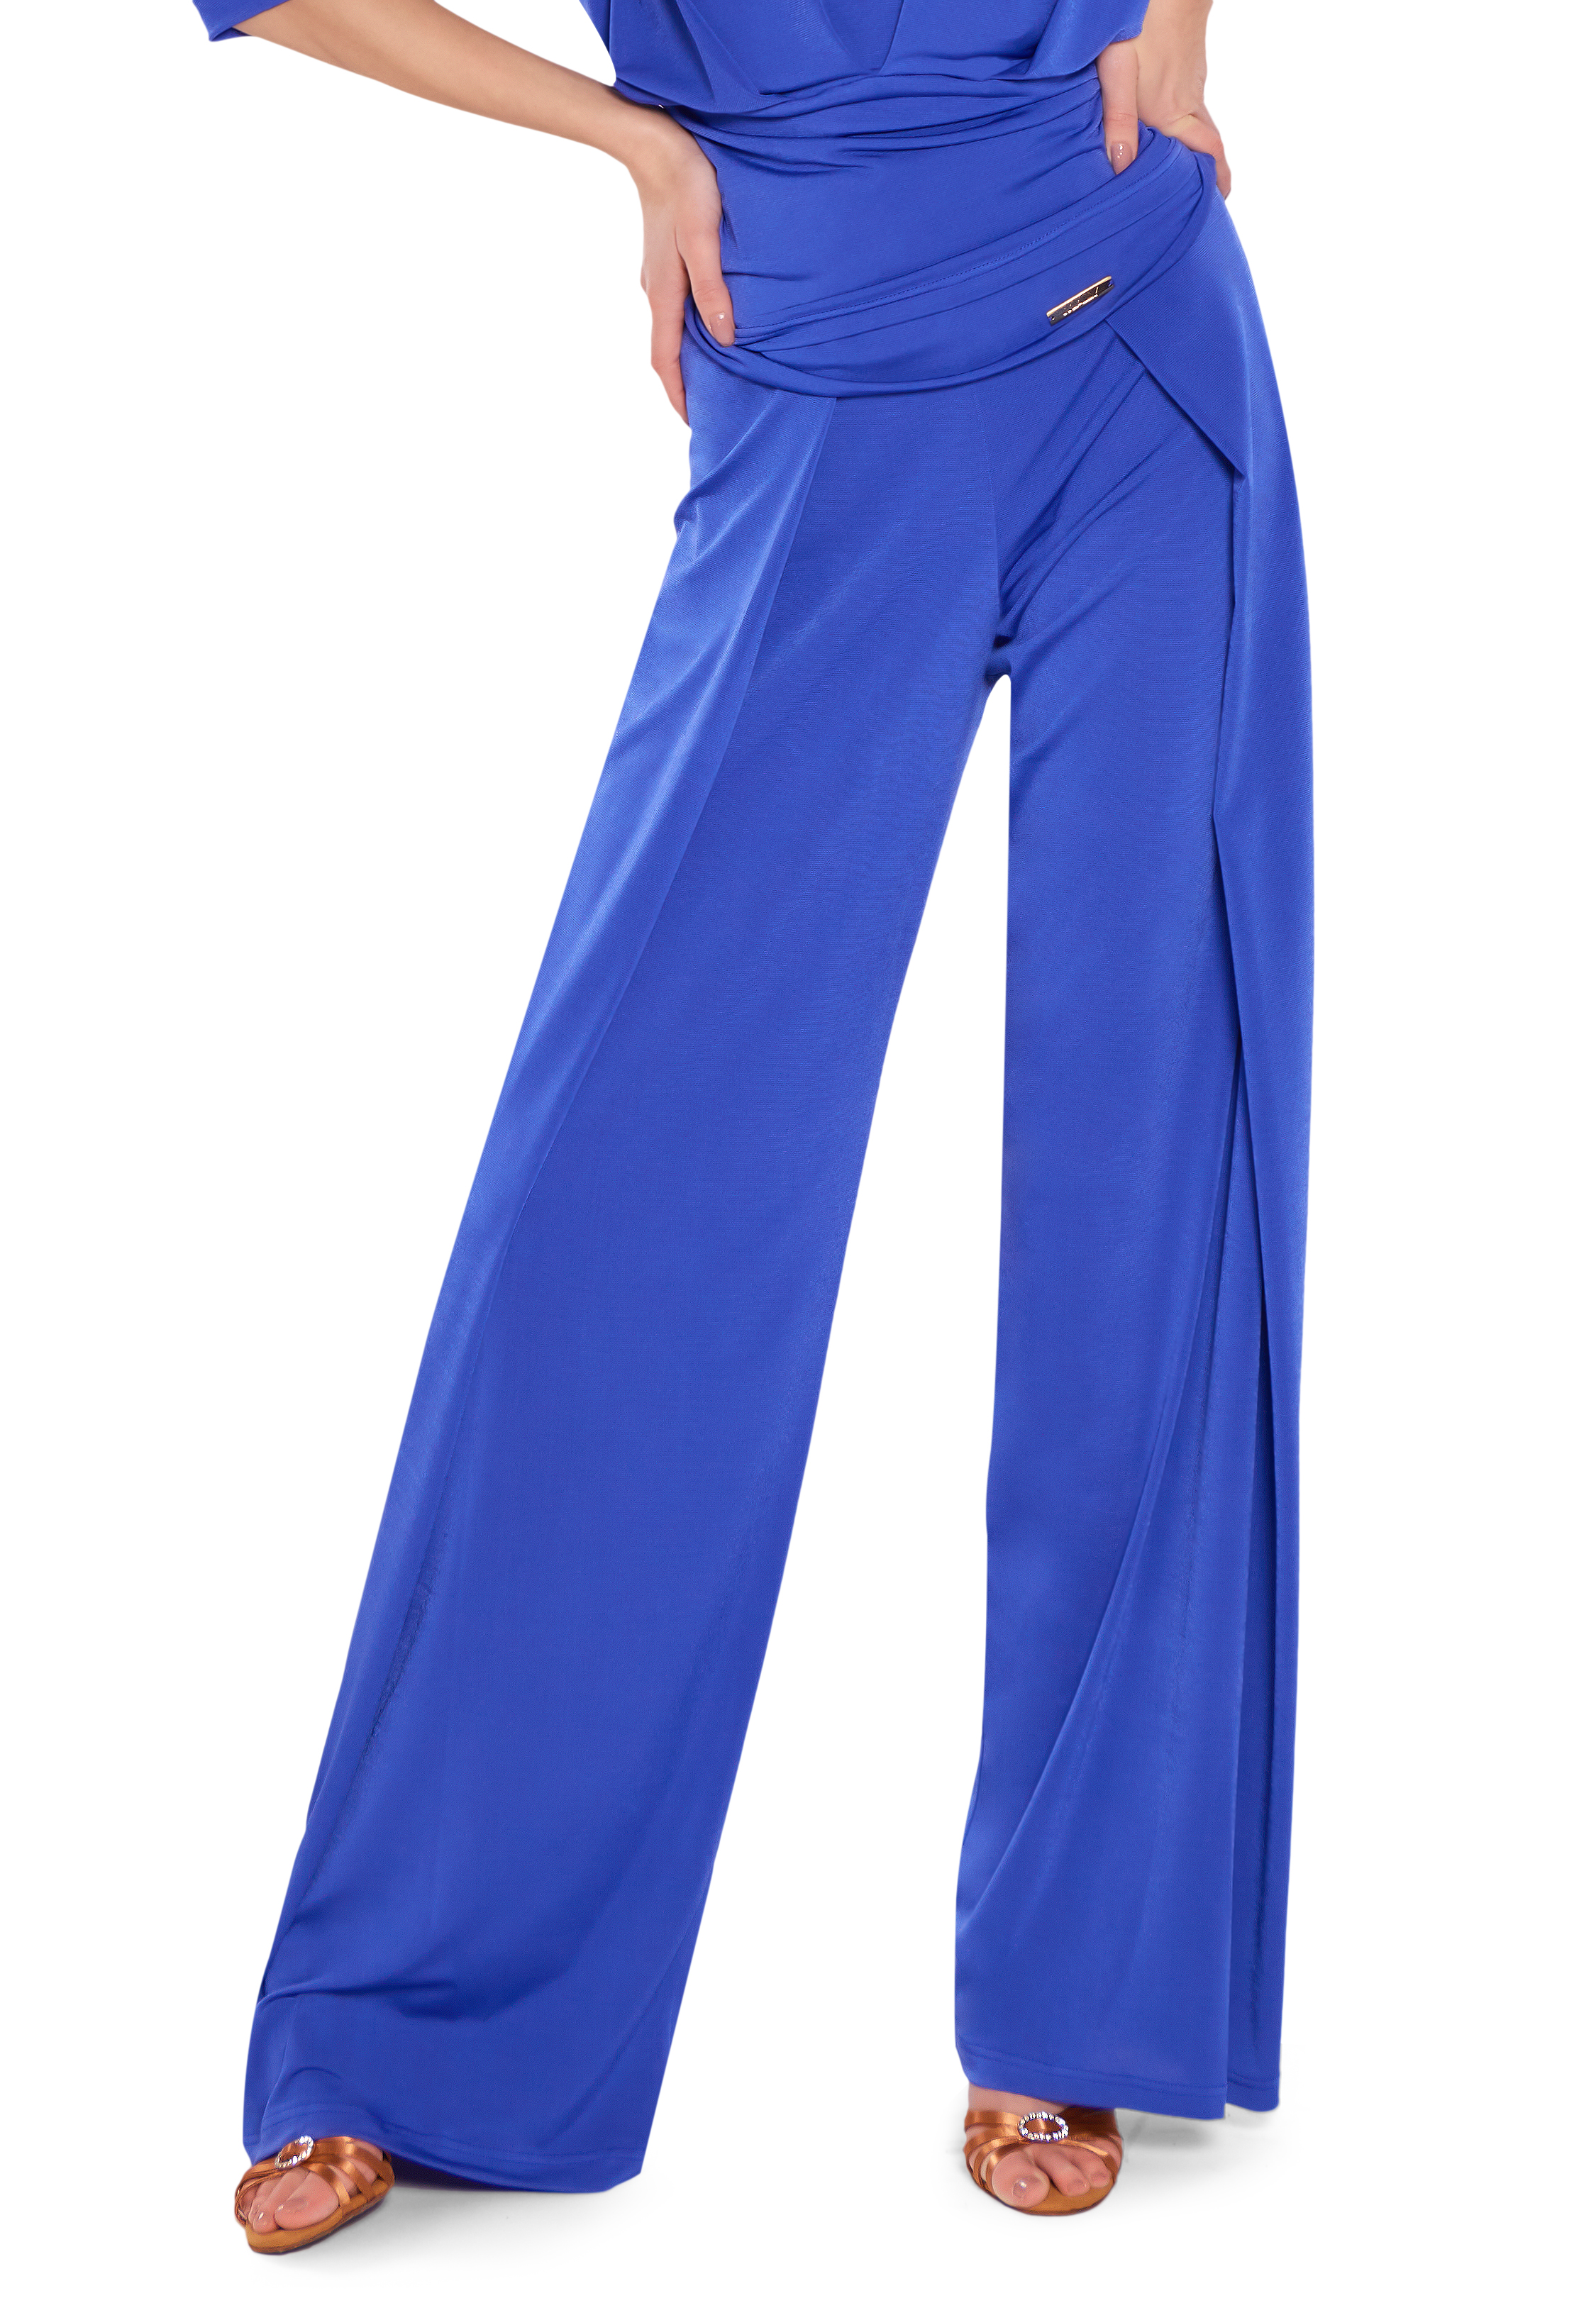 Cobalt trousers with wide-down leg